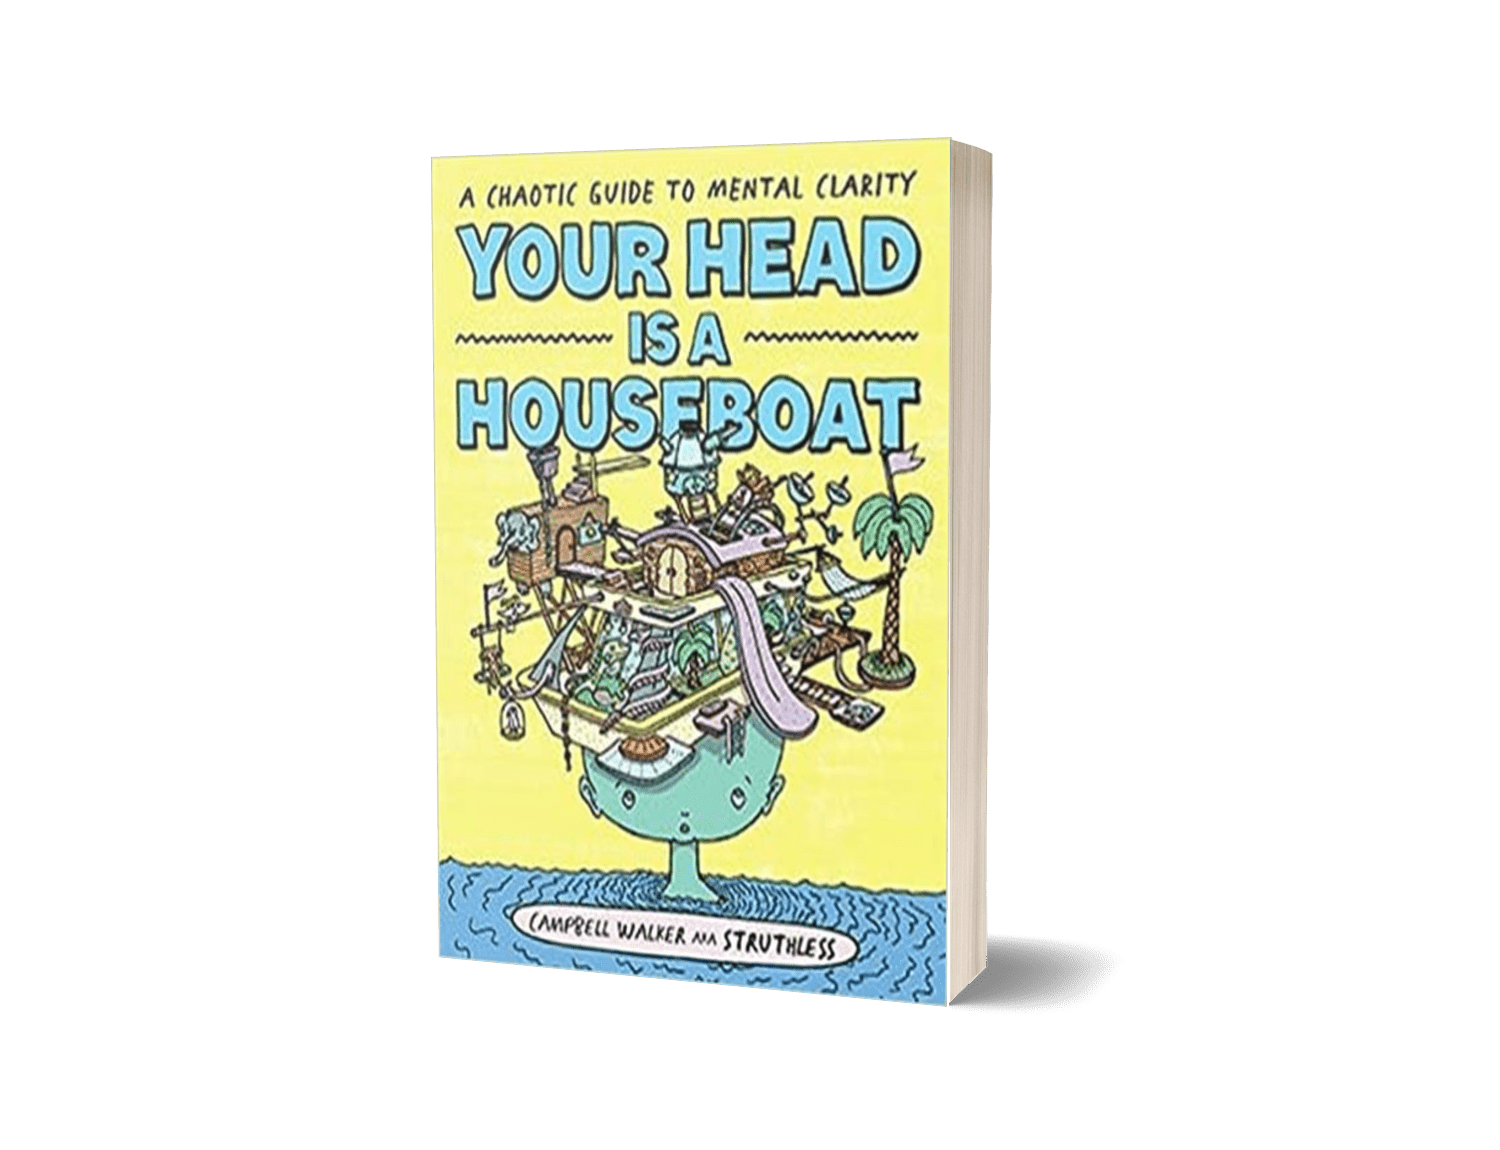 YOUR HEAD IS HOUSEBOAT